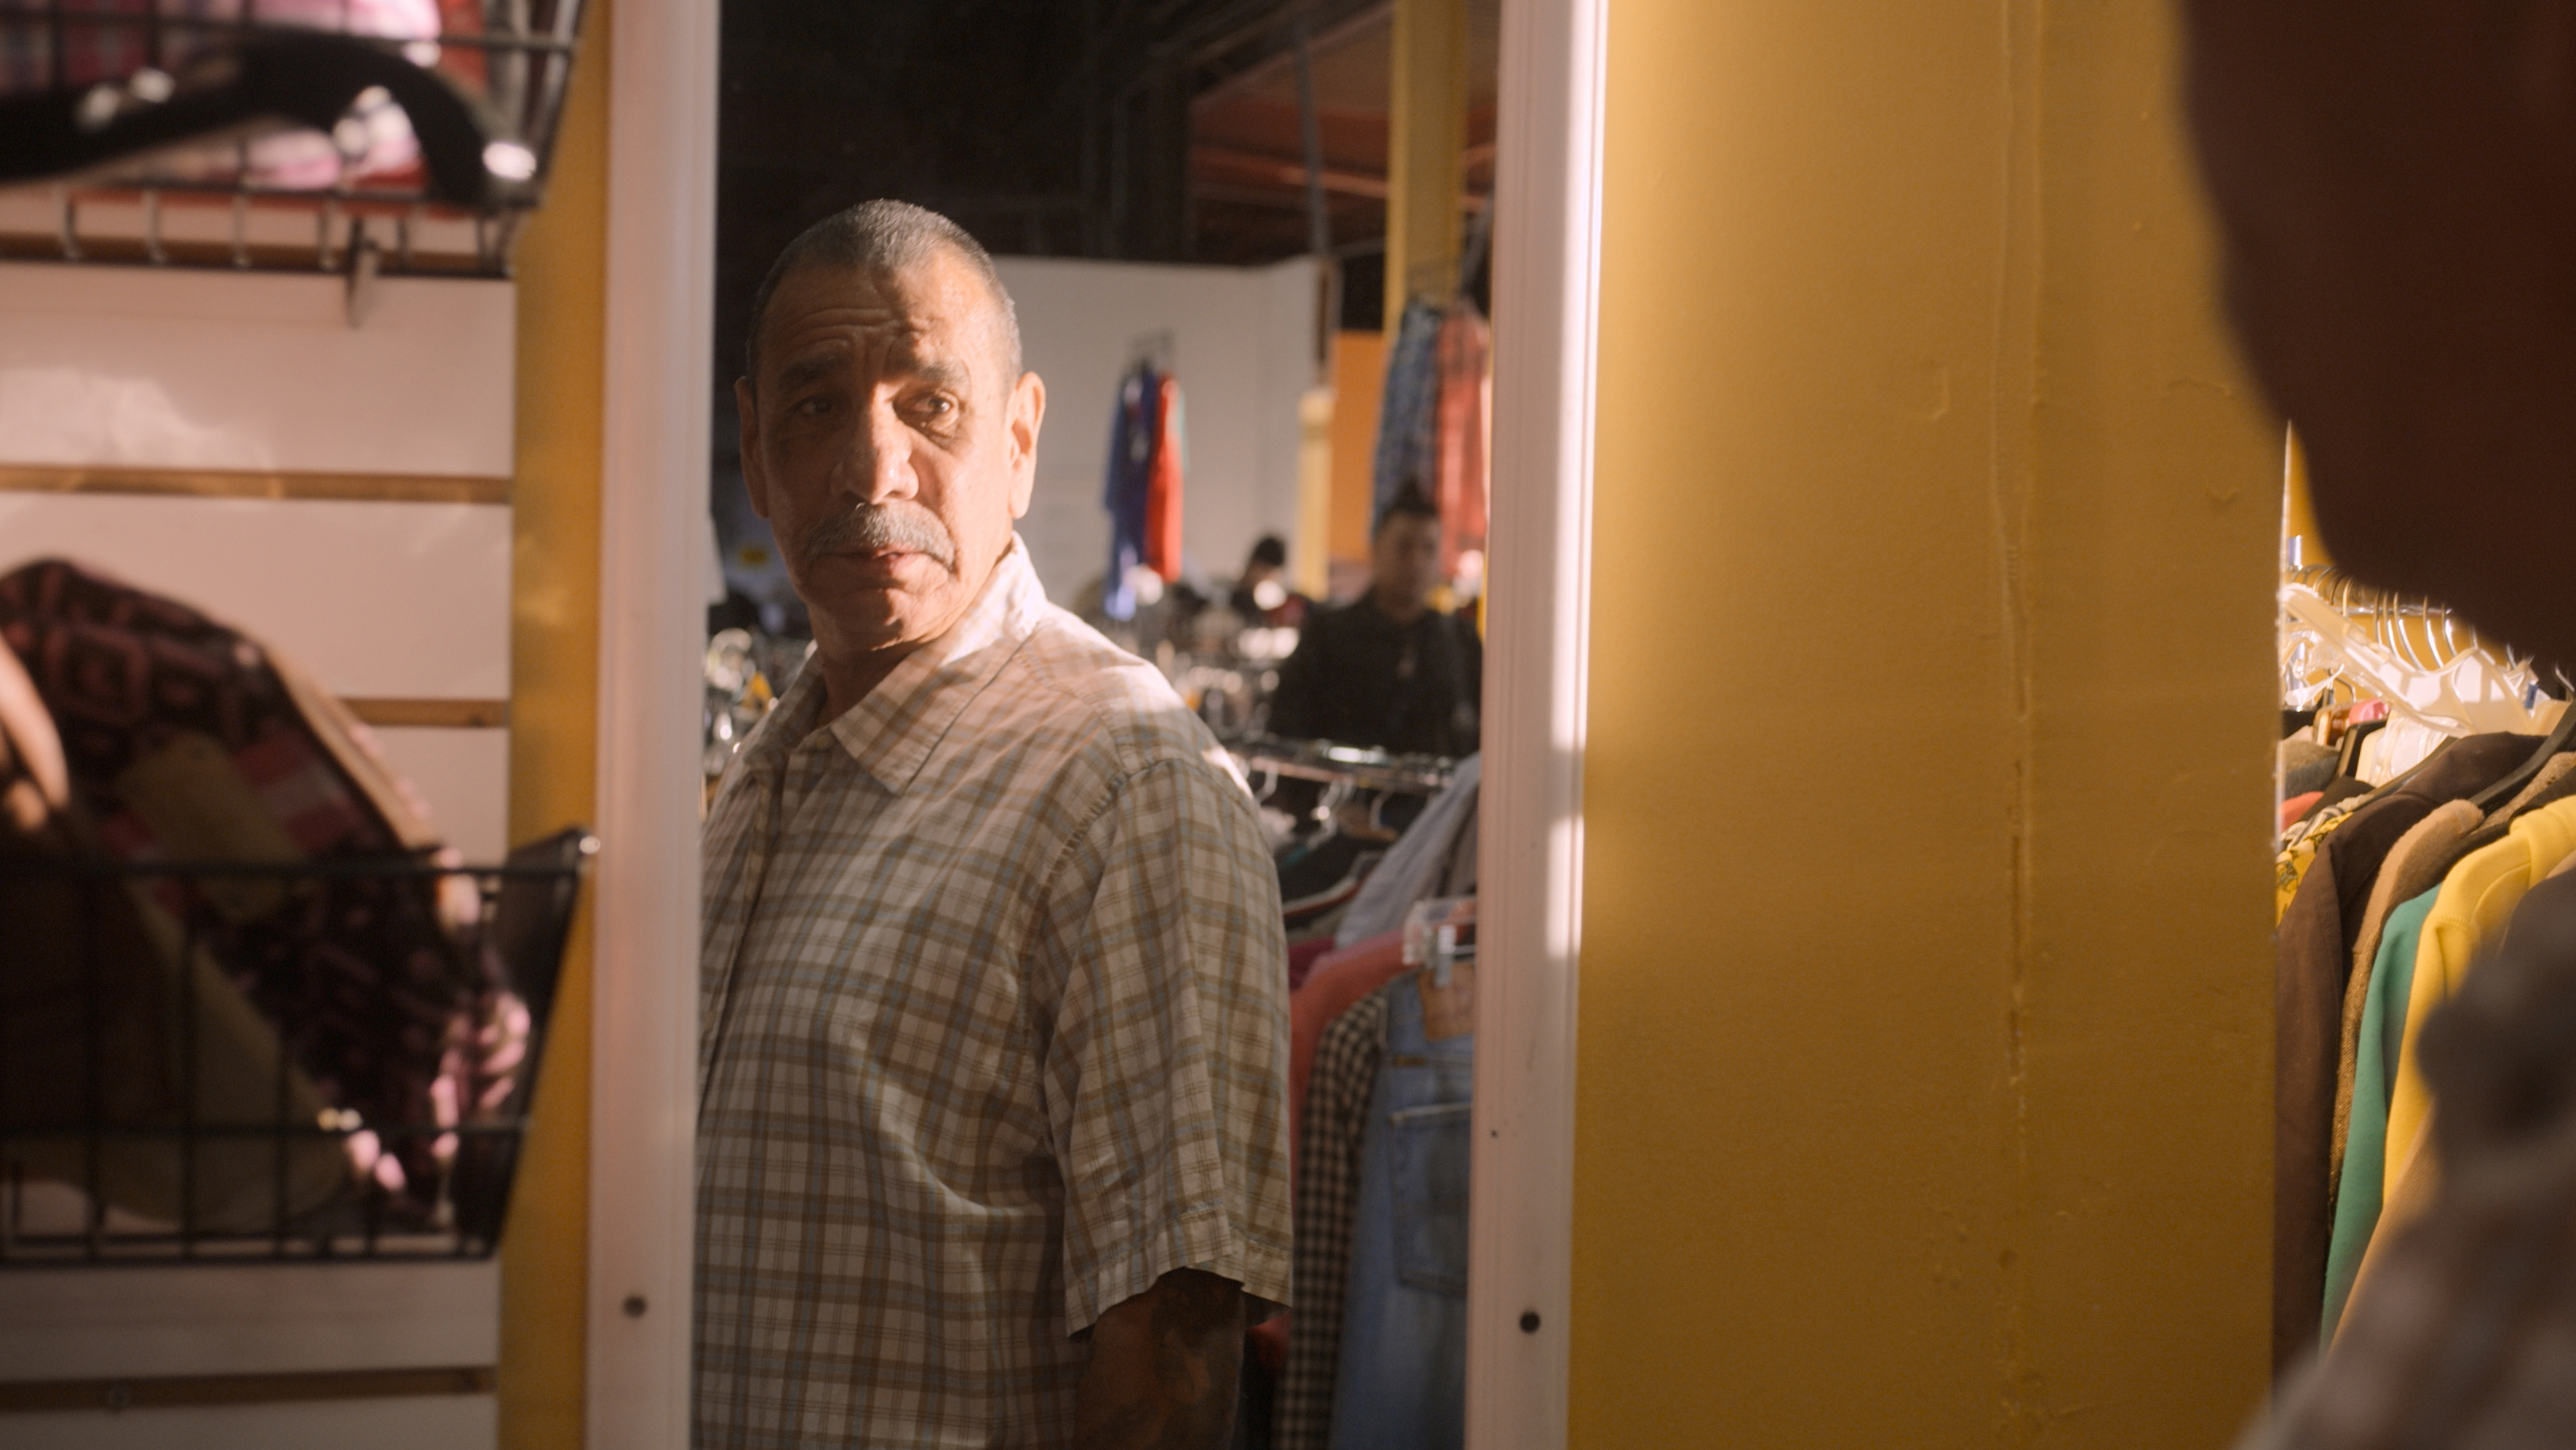 Rudy, who goes shopping after being released from 40 years in prison, in Worn Stories. (COURTESY OF NETFLIX—© 2021 Netflix, Inc.)